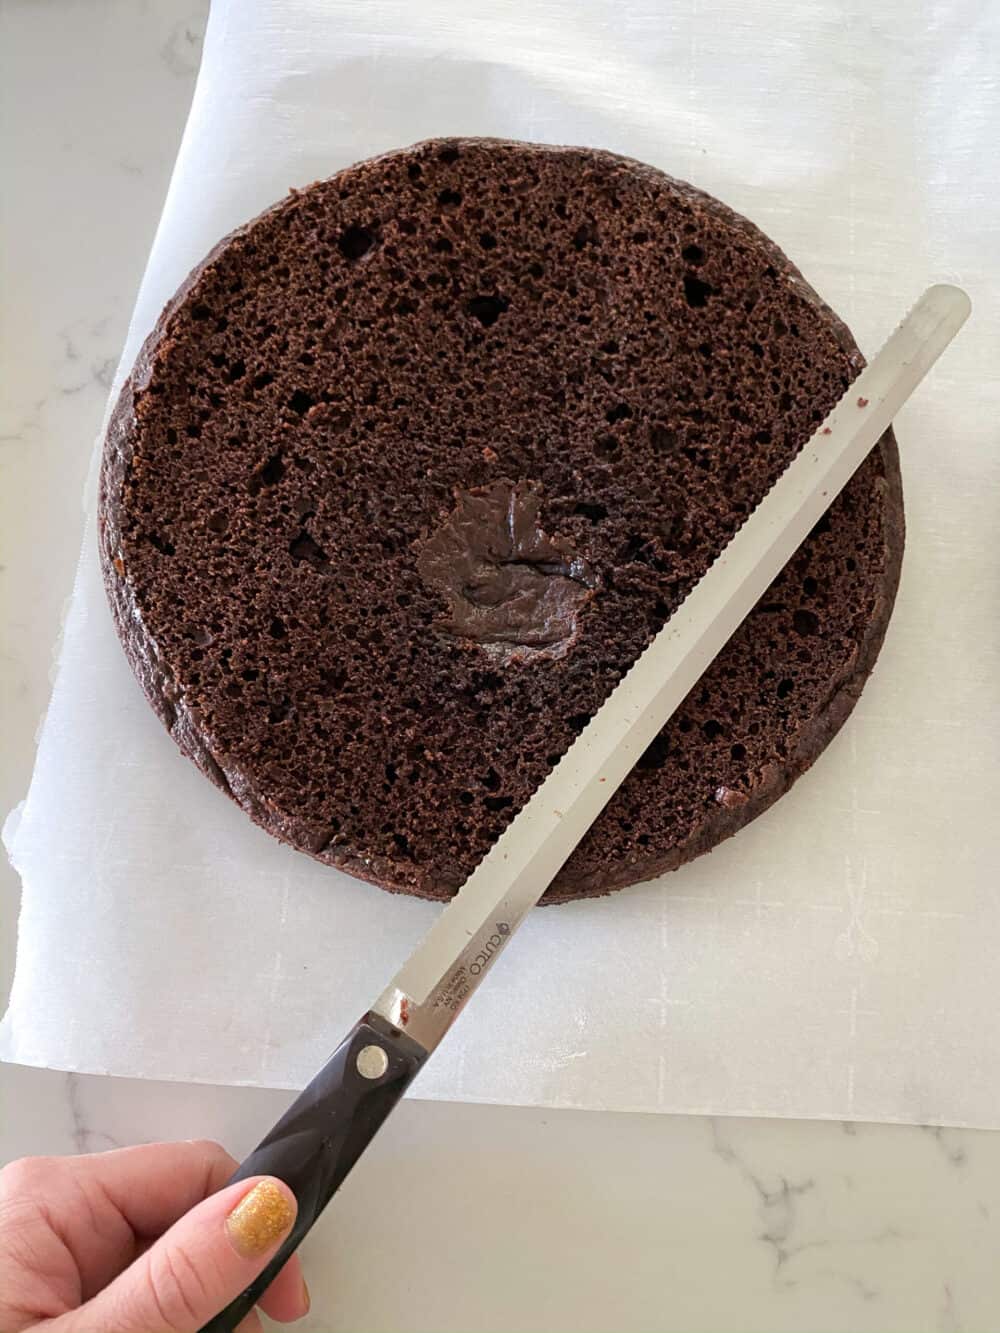 cut tops of baked cakes off with knife to make flat